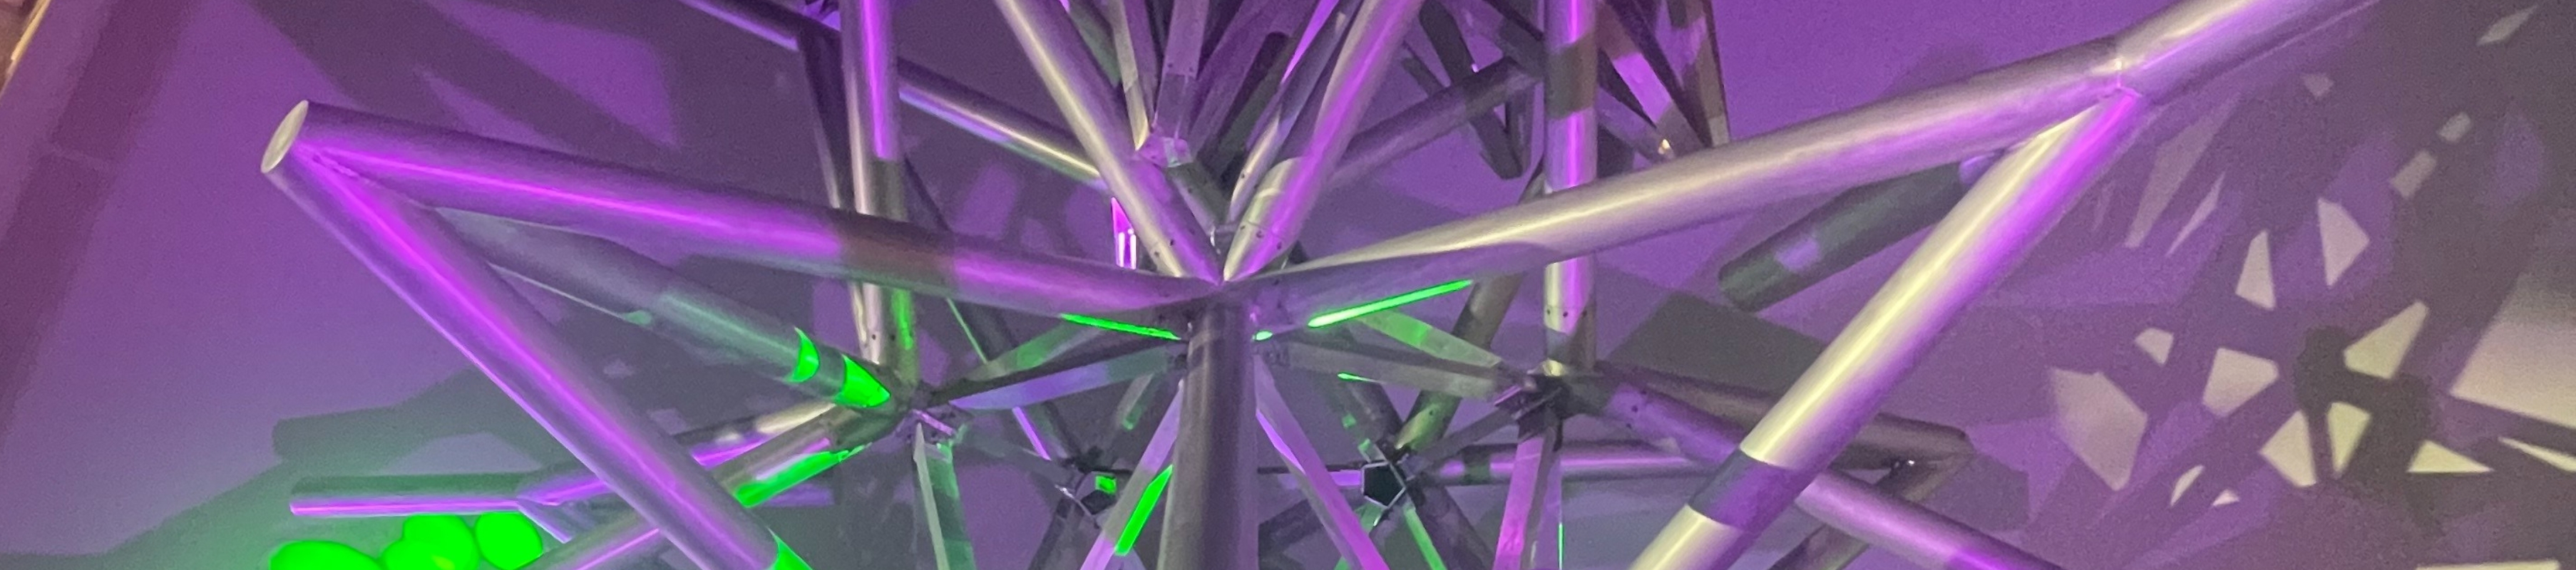 Project Atrium: Frank Stella Jacksonville Stacked Stars lit up with purple and green lights during MOCA's Centennial Gala